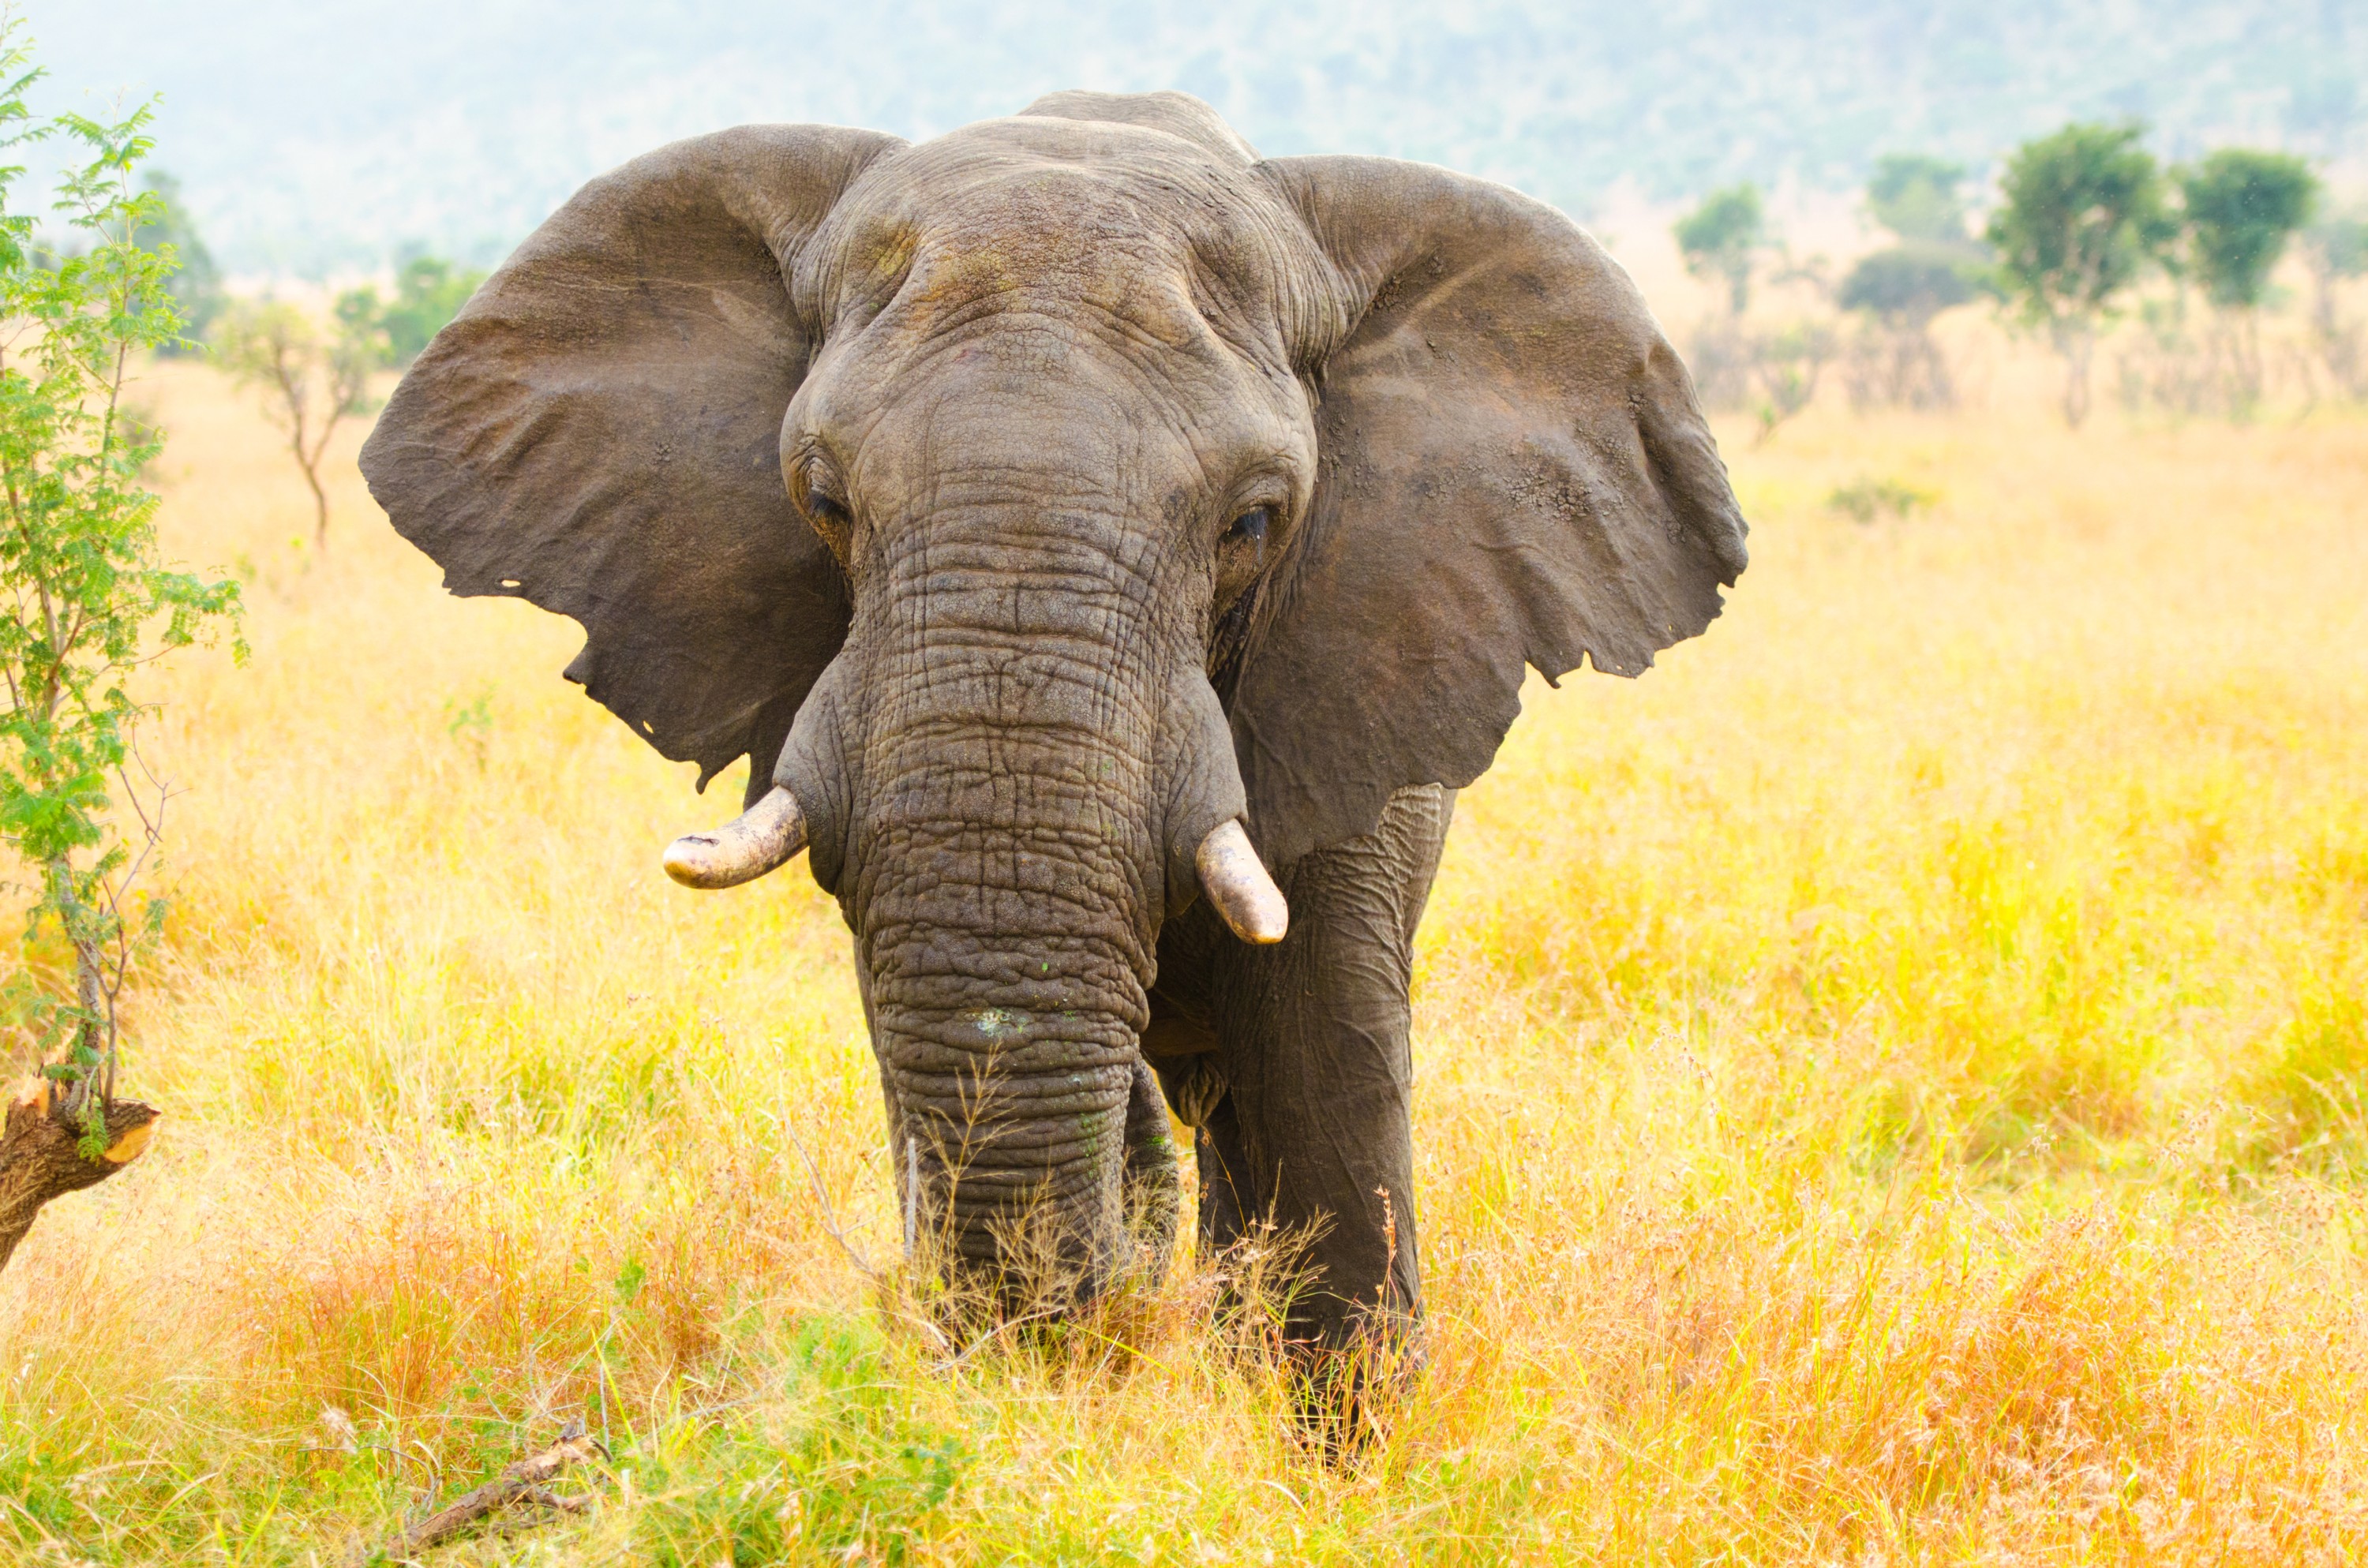 Image of elephant in South Africa